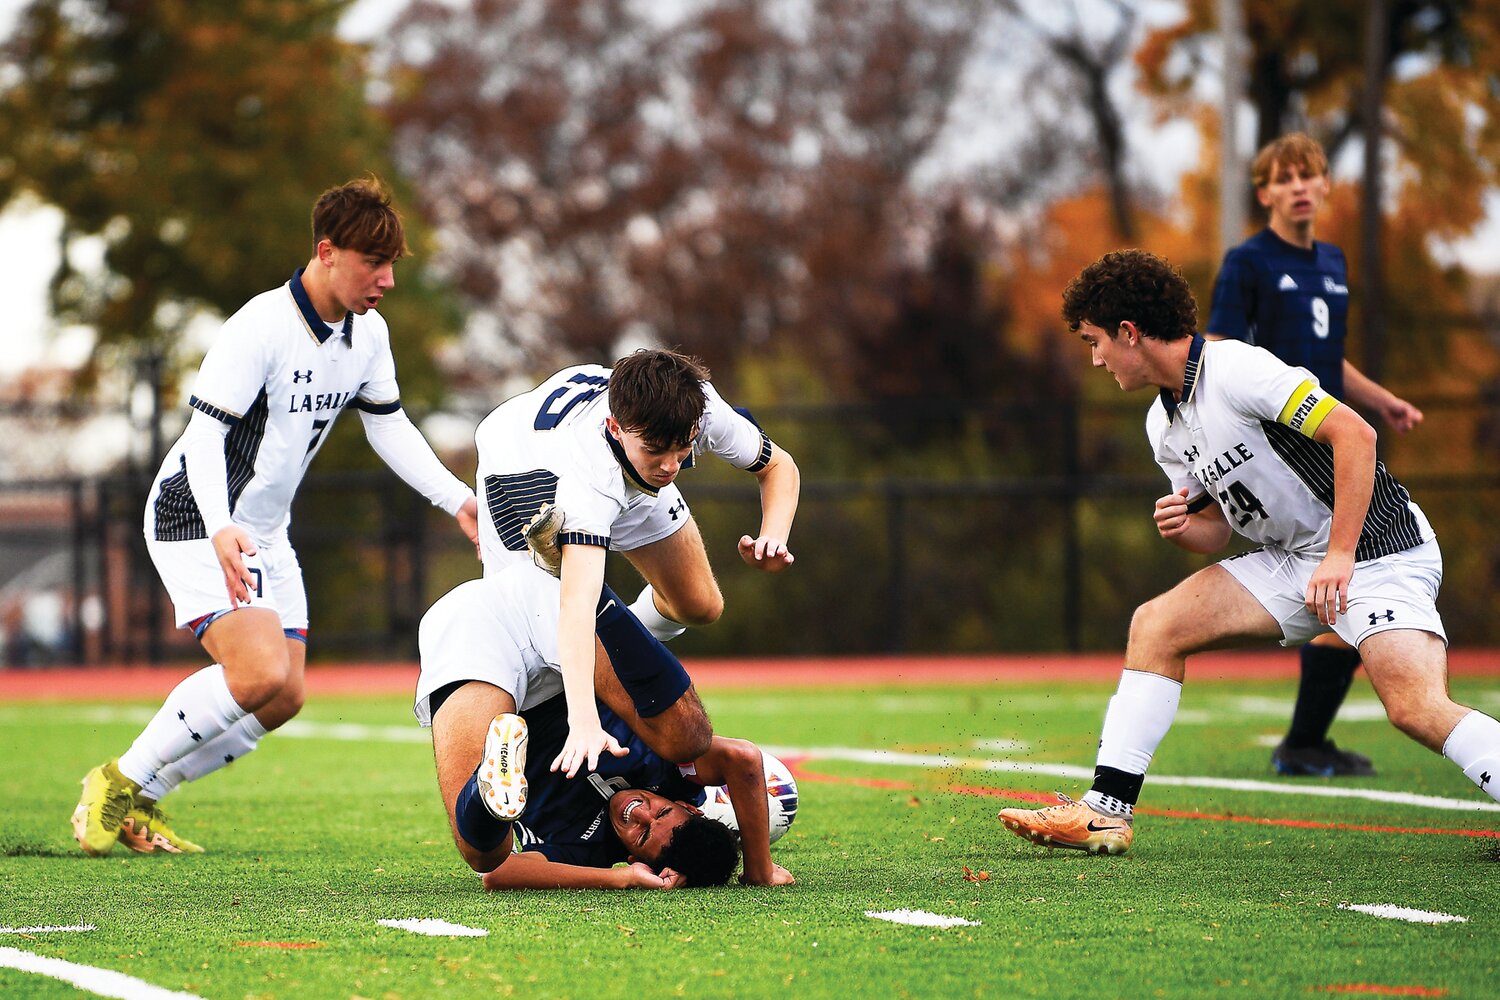 Council Rock North’s Ari Pollack gets knocked to the ground by La Salle’s Joey Kmetz, left, as La Salle’s Liam Connaghan falls over top of him while going for a pass.